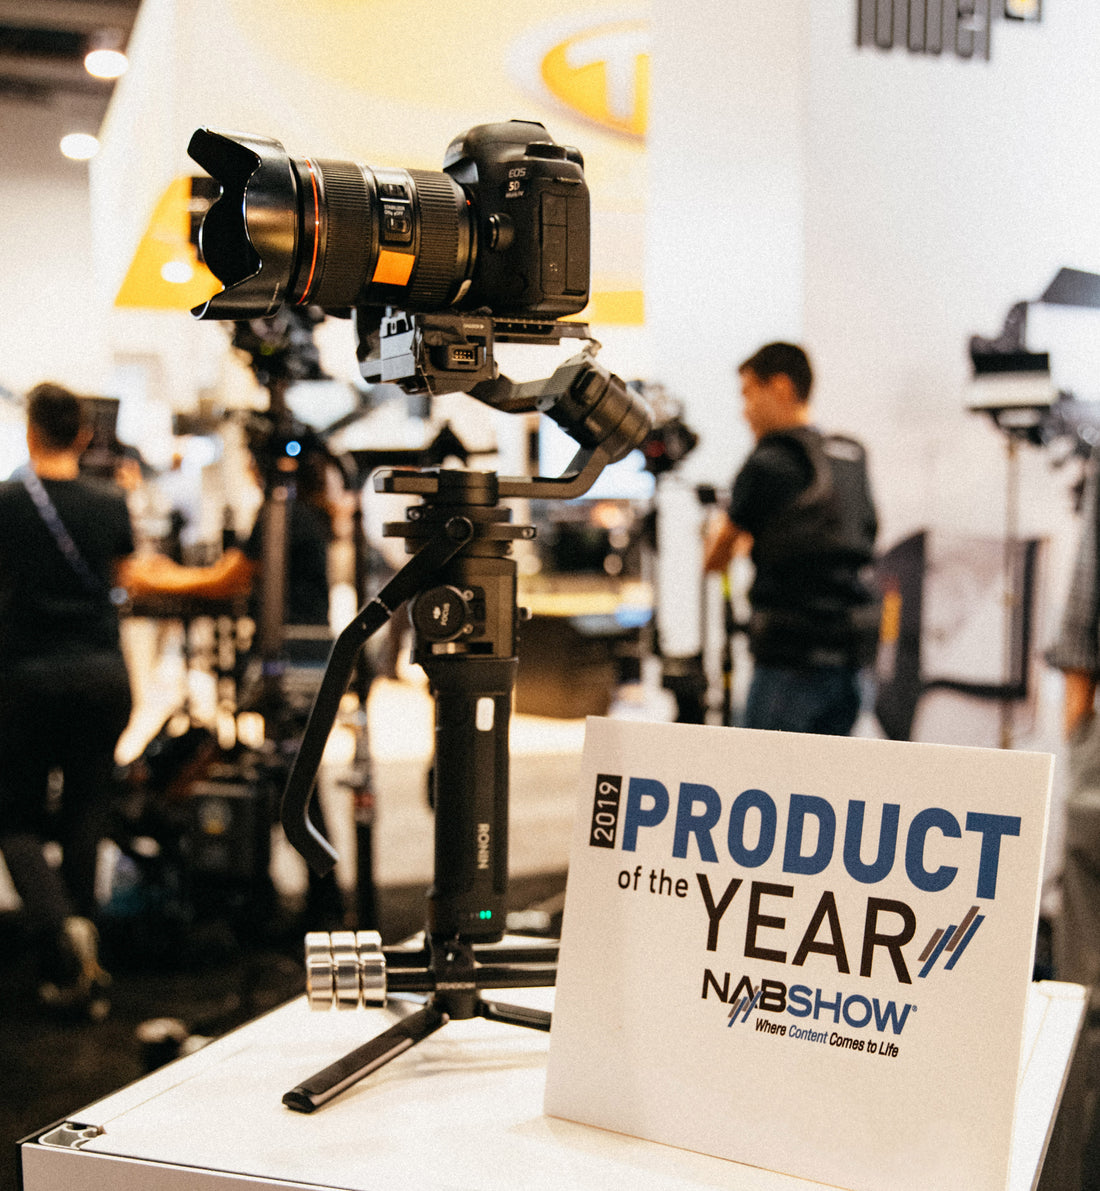 The Tiffen Company's New Steadicam Steadimate-S Wins 2019 NAB Show Product of the Year Award